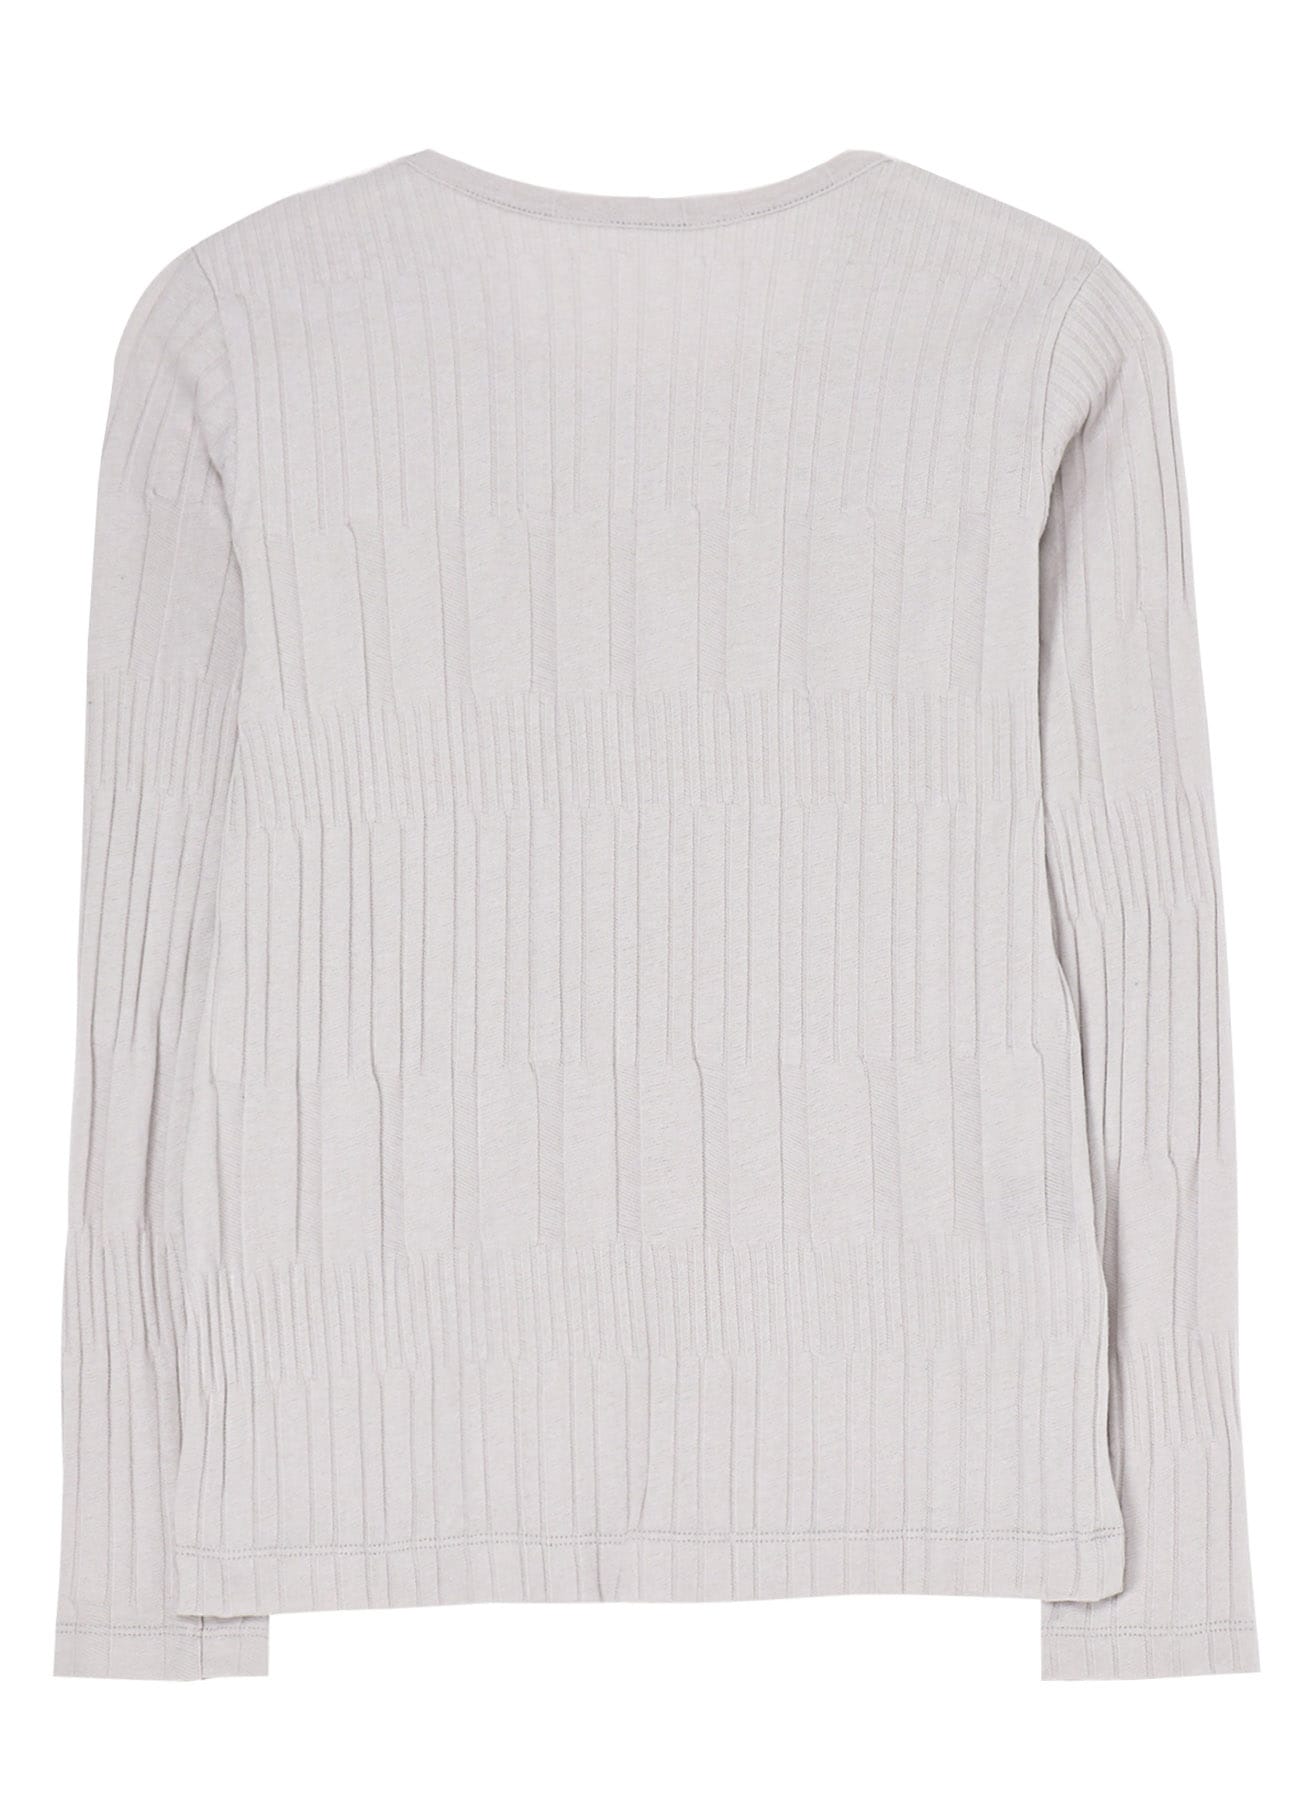 40/ COTTON HARD TWISTED WRINKLED RIBBED LONG SLEEVE T